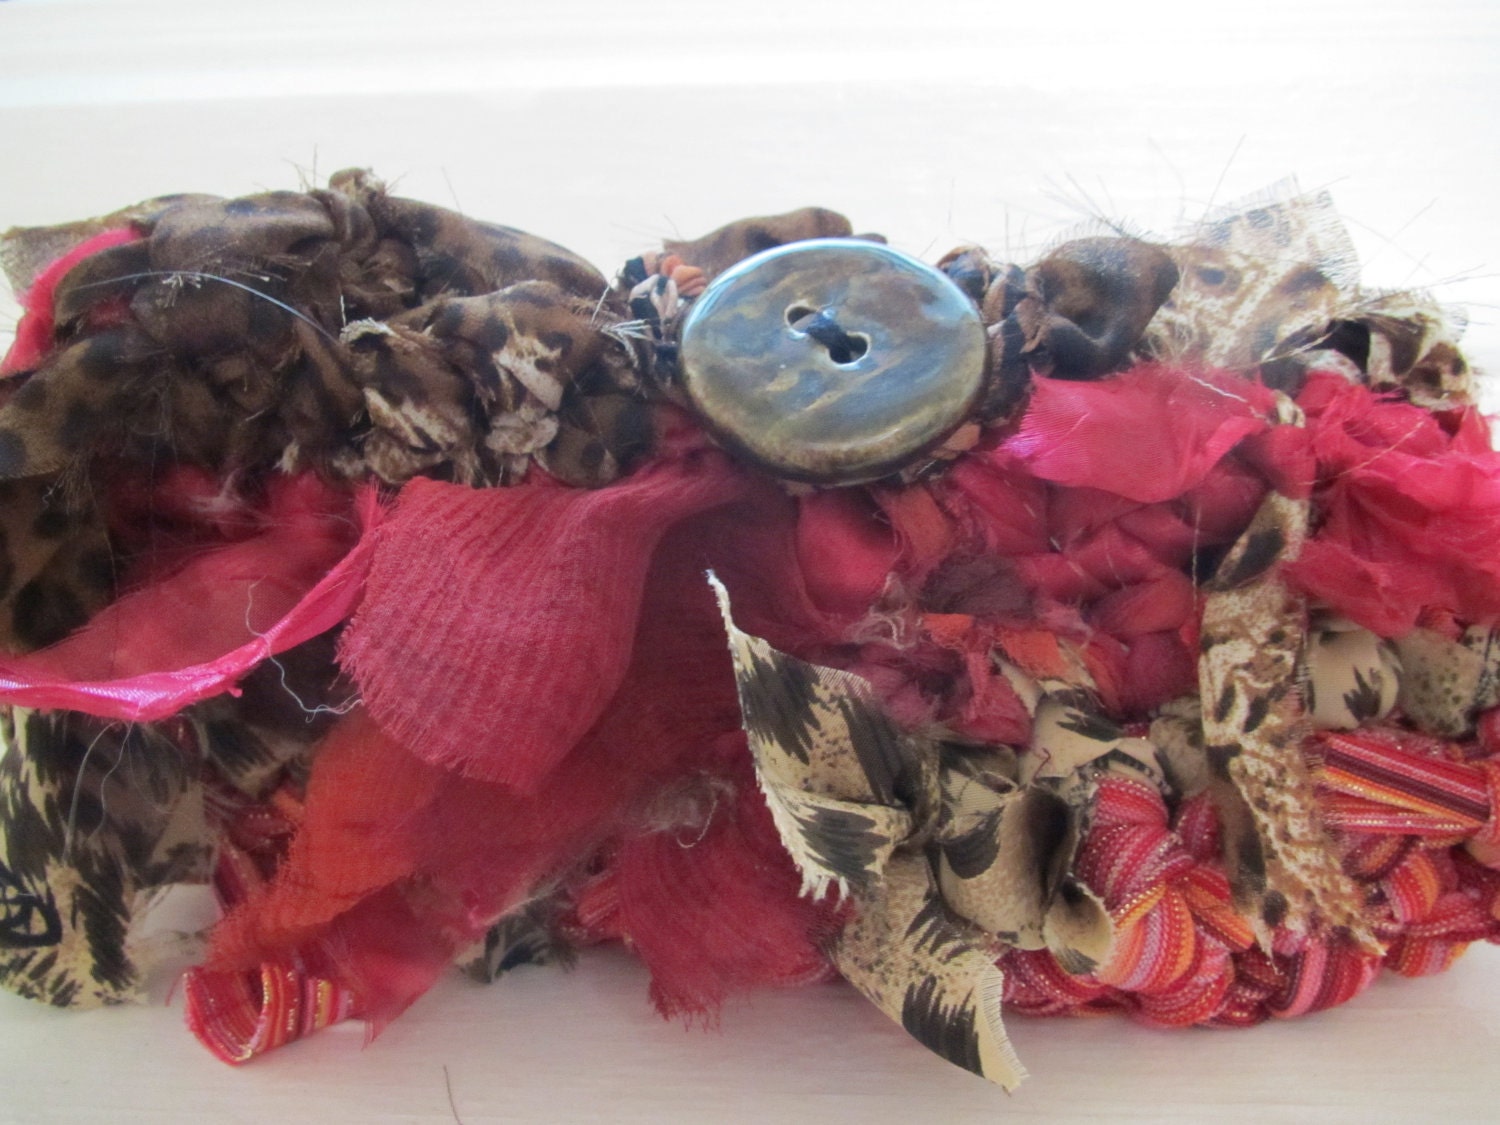 One of a Kind "Mini Clutch" style TeeBag, Pinks and Browns with Animal Print created from recycled apparel.